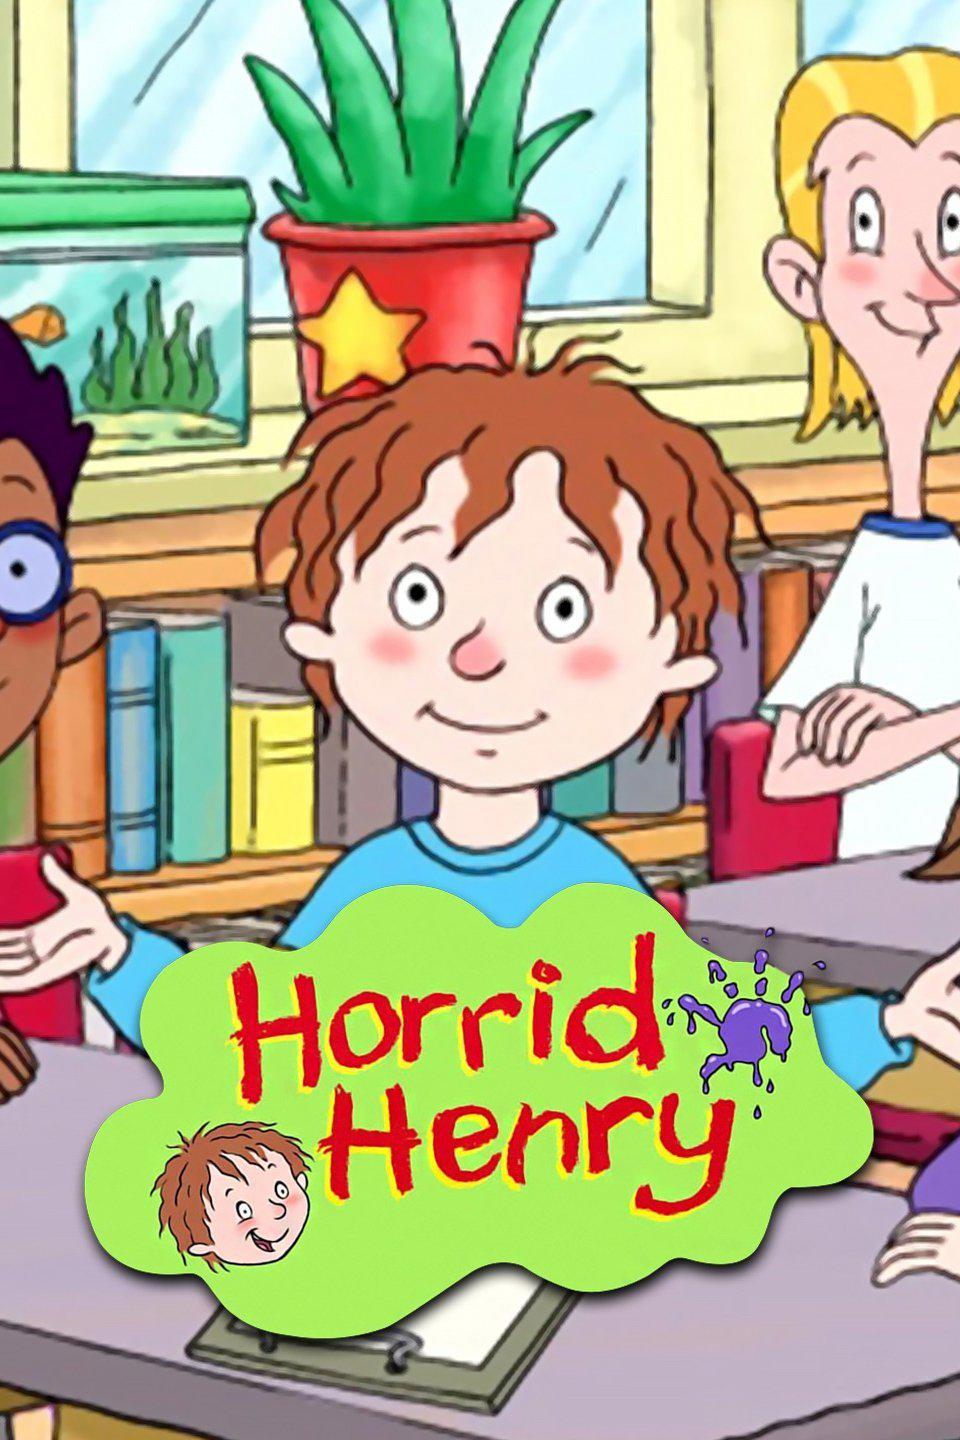 Horrid Henry (CITV): India daily TV audience insights for smarter content  decisions - Parrot Analytics